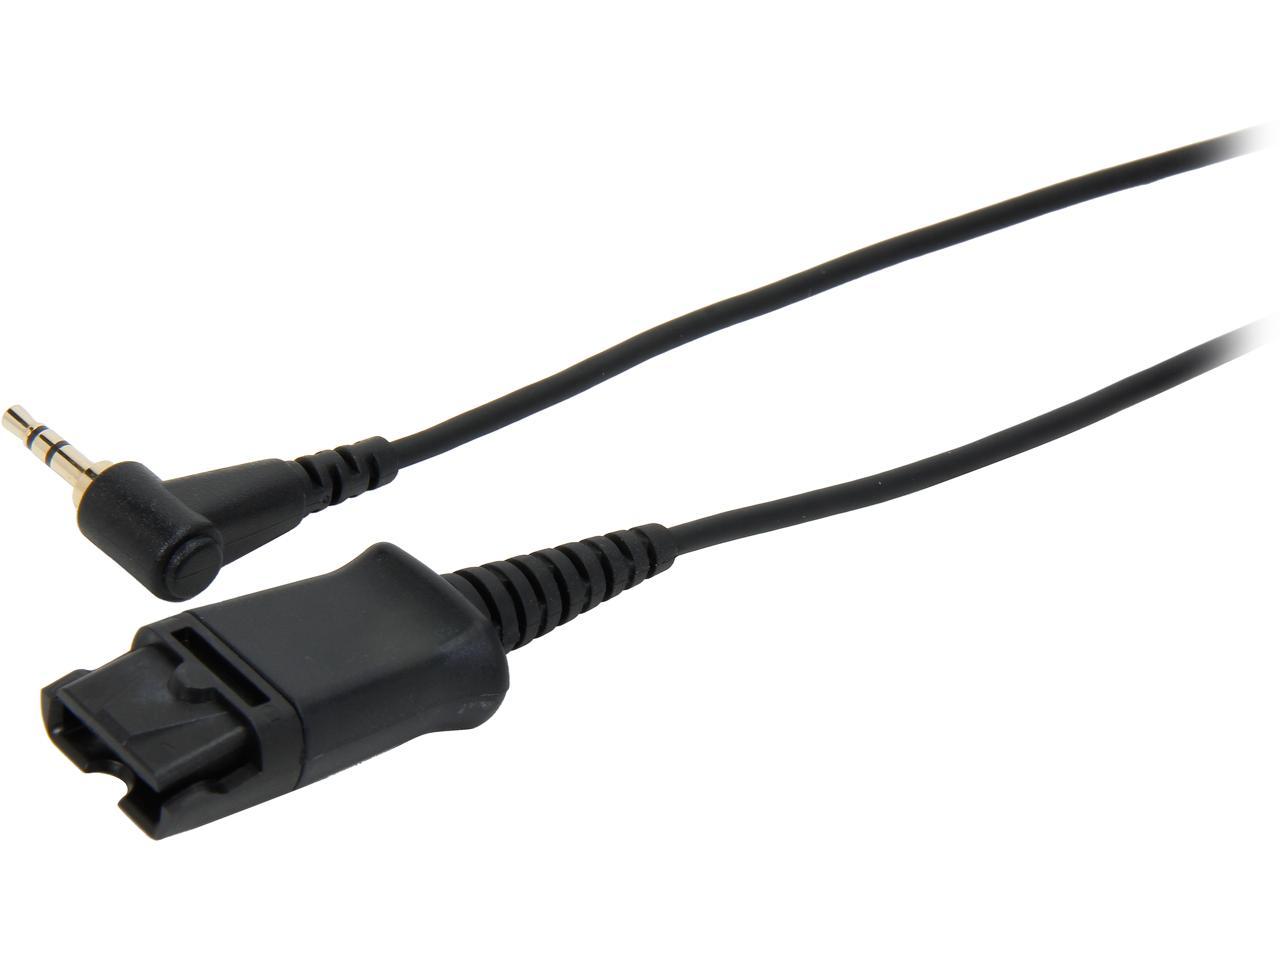 Plantronics Quick Disconnect to 2.5mm Cable for H-Series Headsets (64279-02) - image 1 of 3